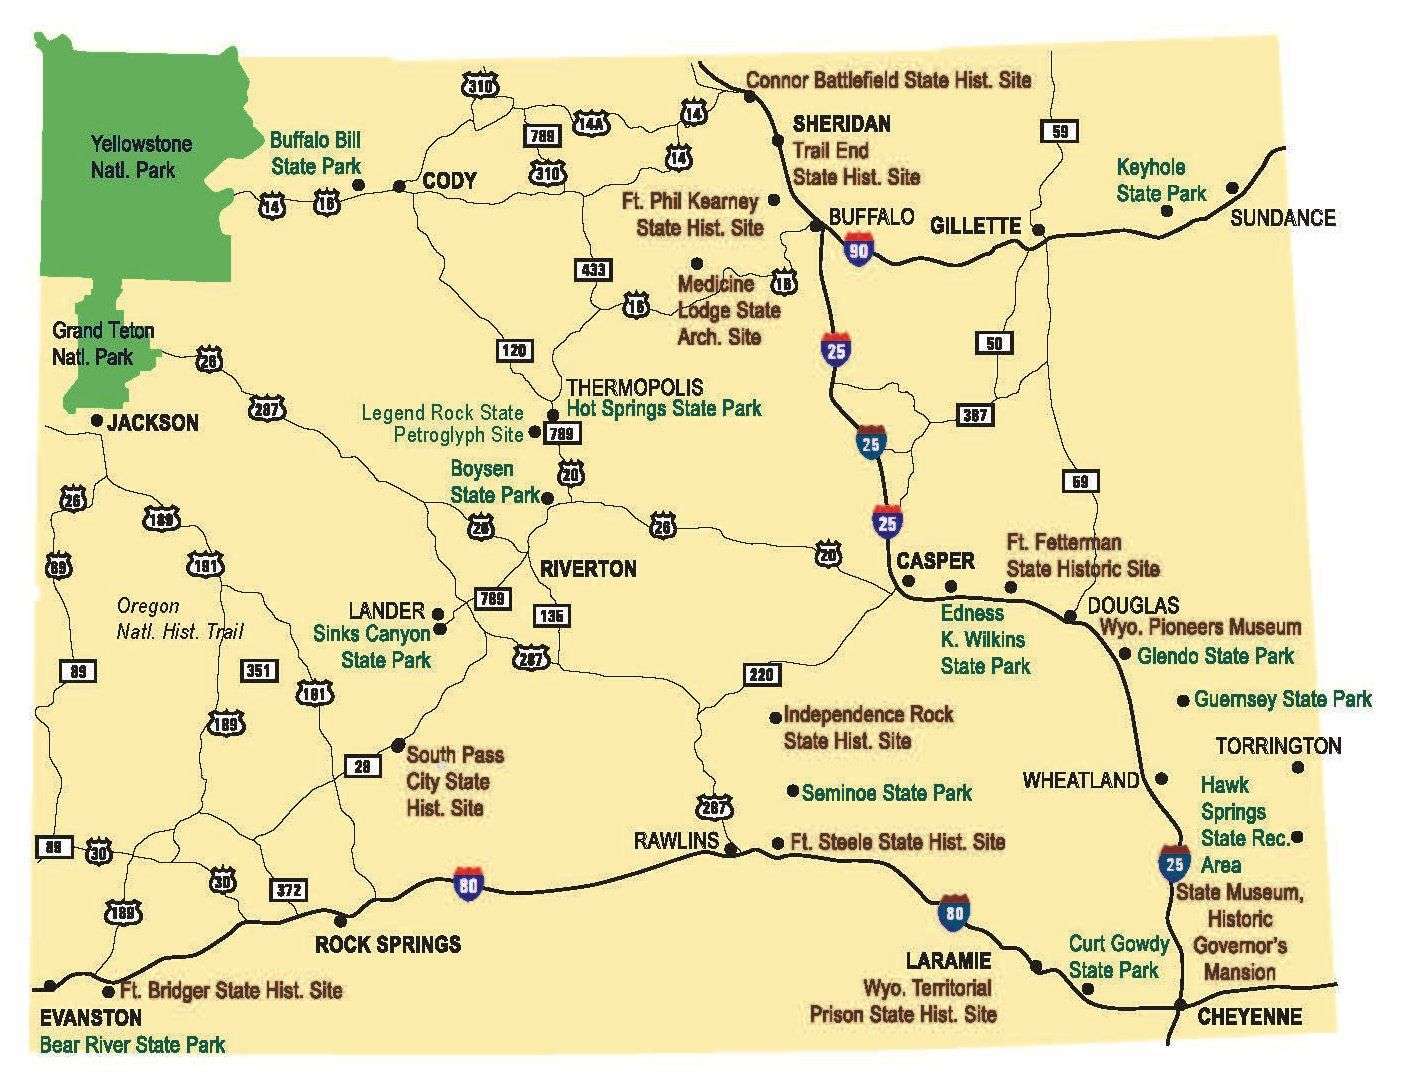 Wyoming State Parks, Historic Site and Trails